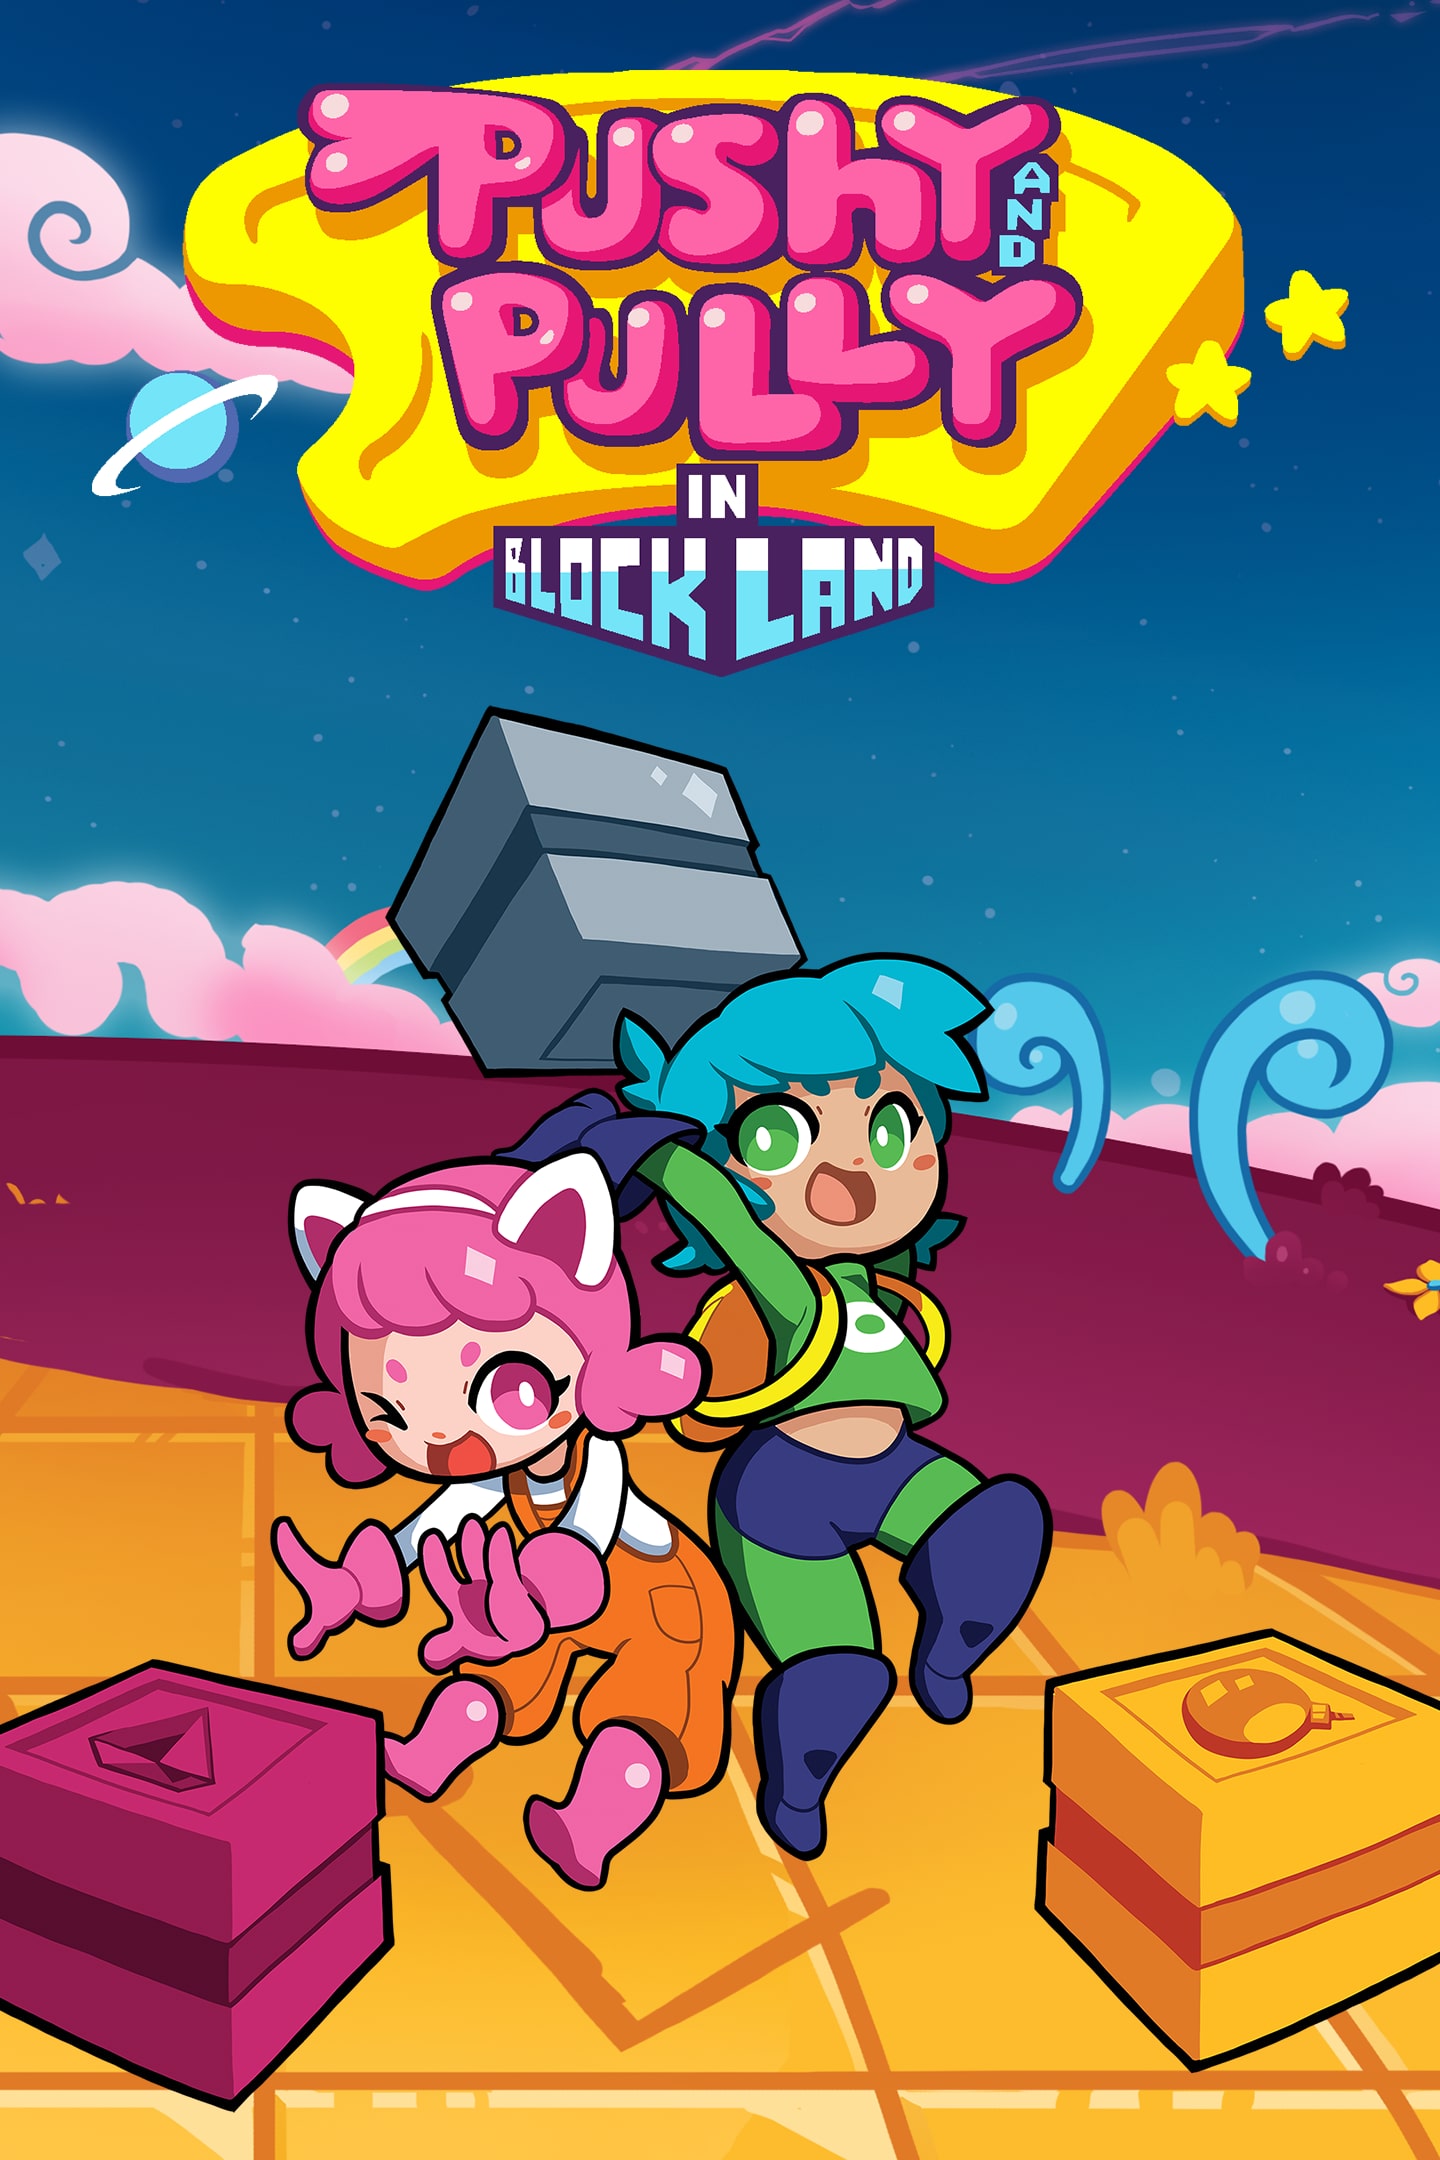 Pushy And Pully In Blockland Review - The Indie Game Website